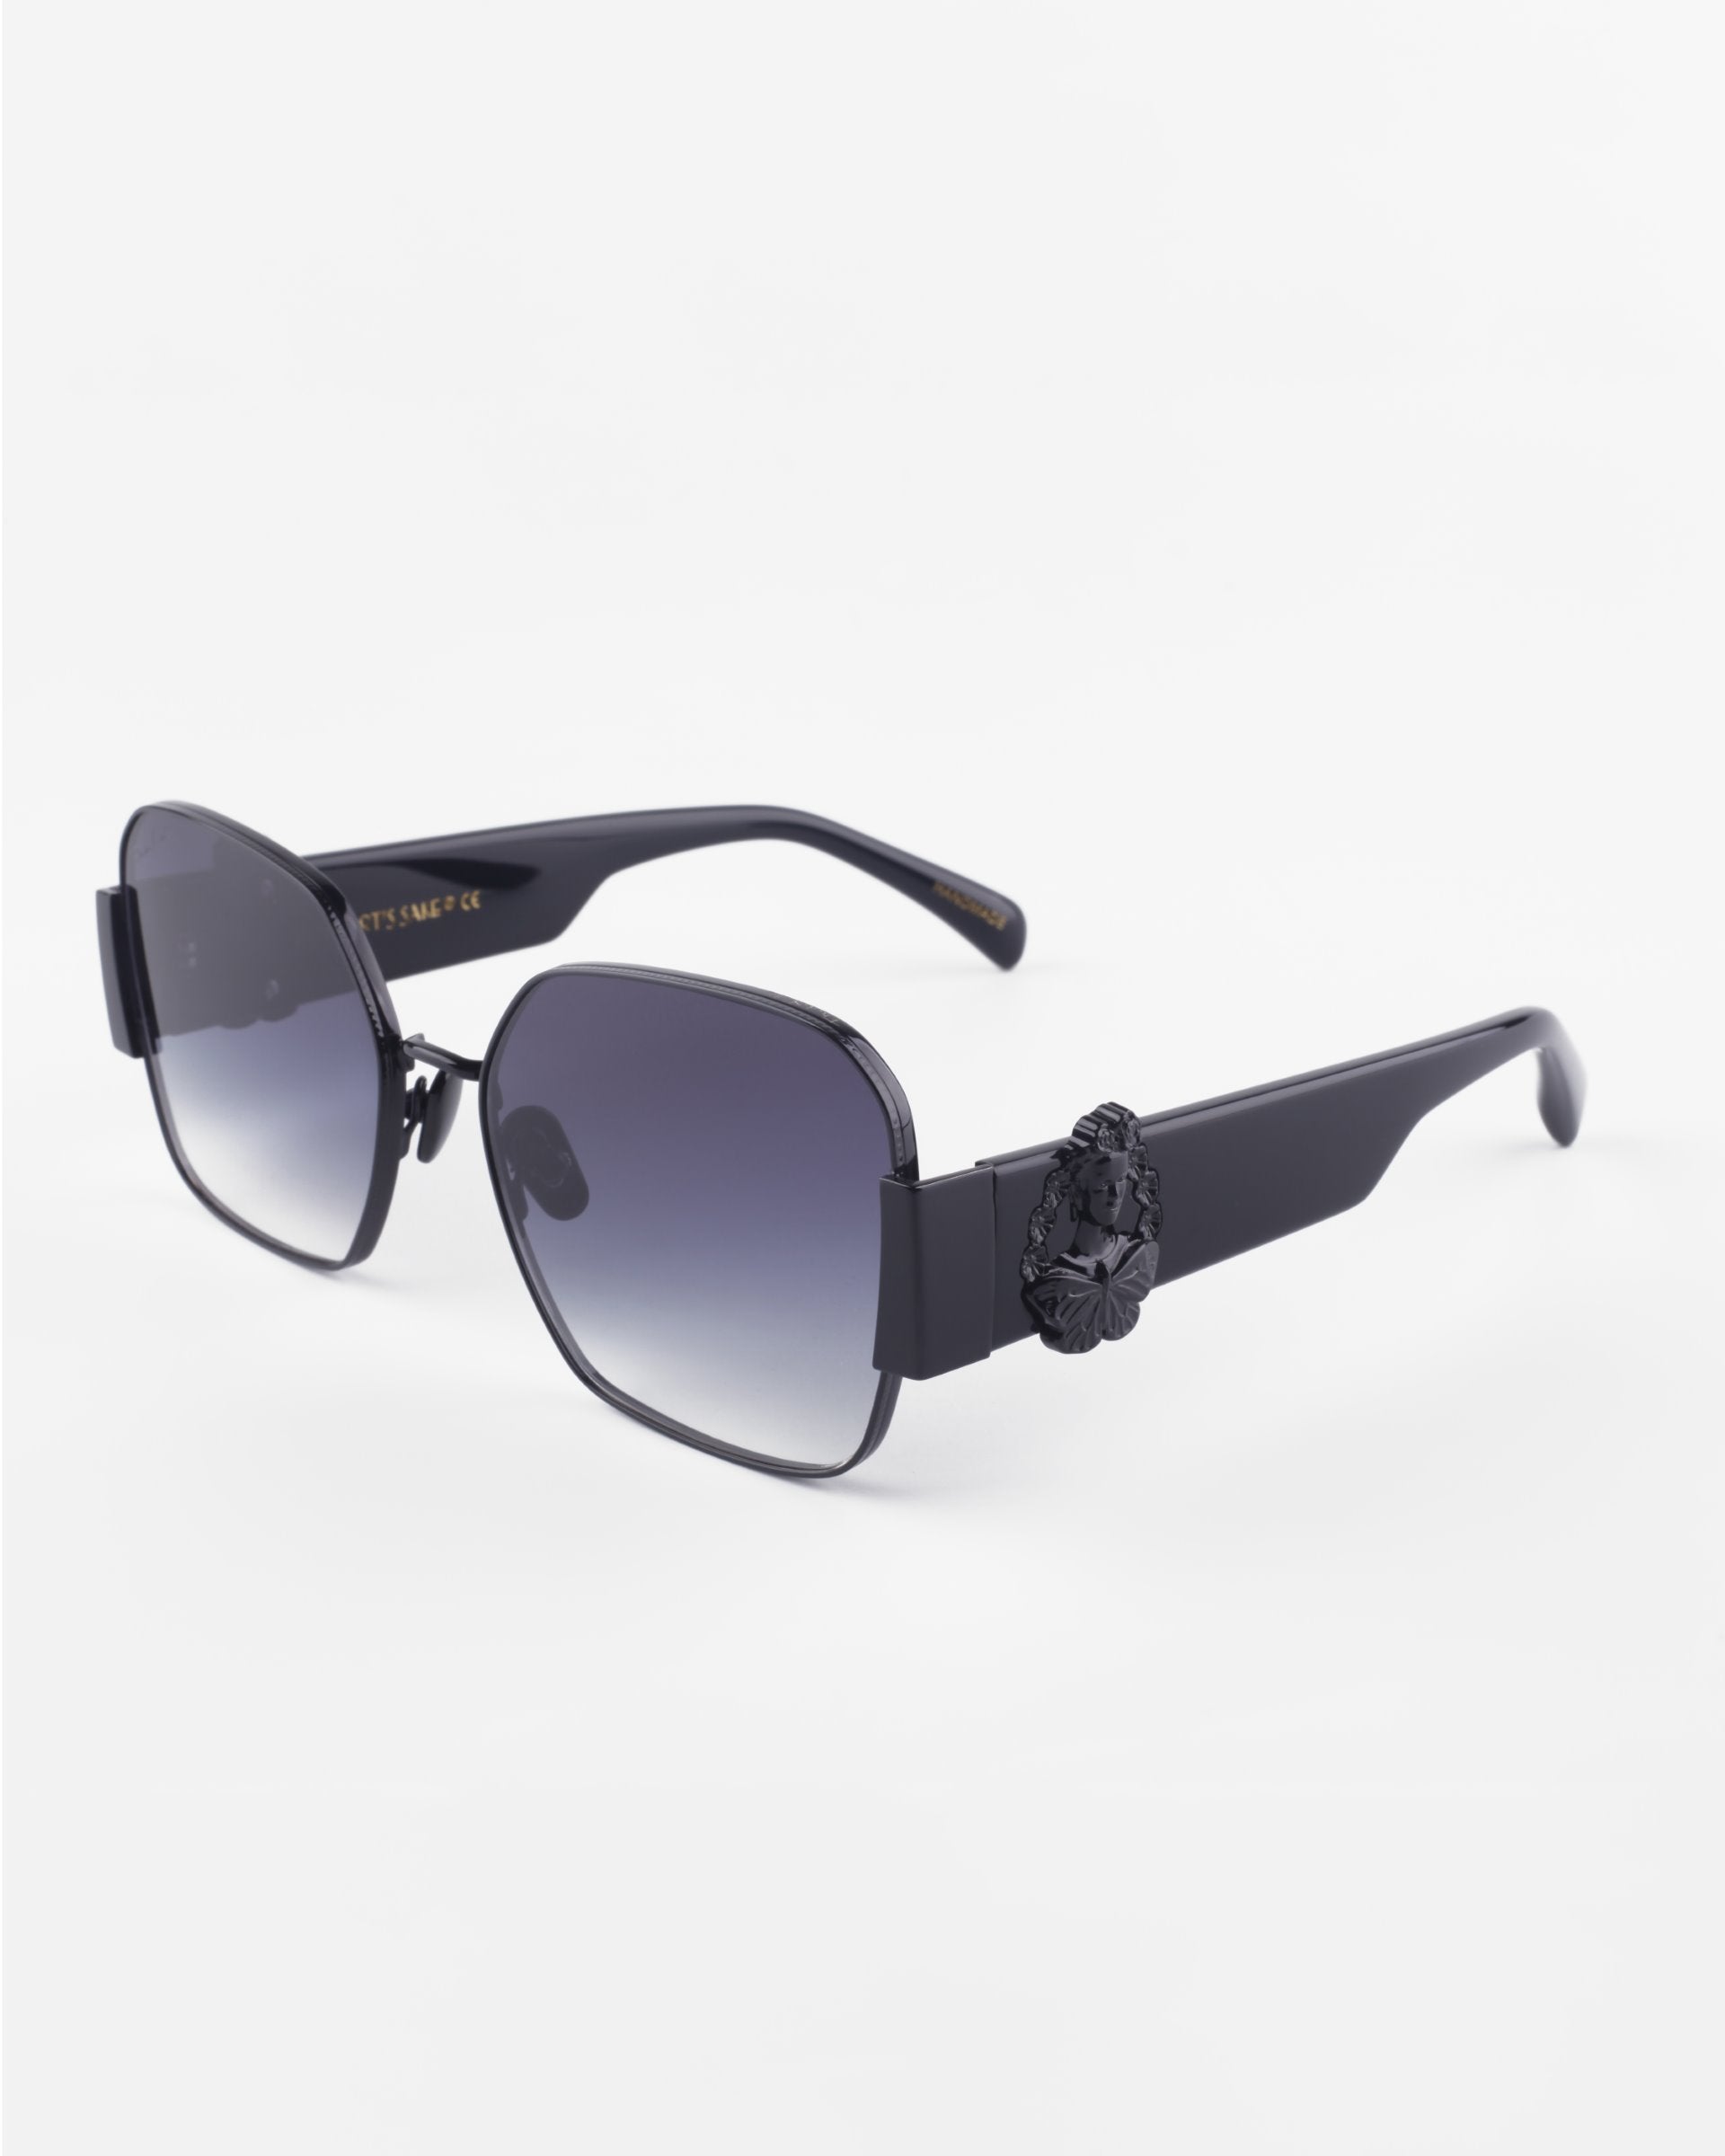 A pair of stylish, oversized black sunglasses with square lenses that have a gradient tint from dark to light. Featuring ultra-lightweight nylon lenses and 100% UVA &amp; UVB protection, the Frida Mask by For Art&#39;s Sake® also boasts a decorative black piece on the gold-plated stainless steel hinges against a white background.